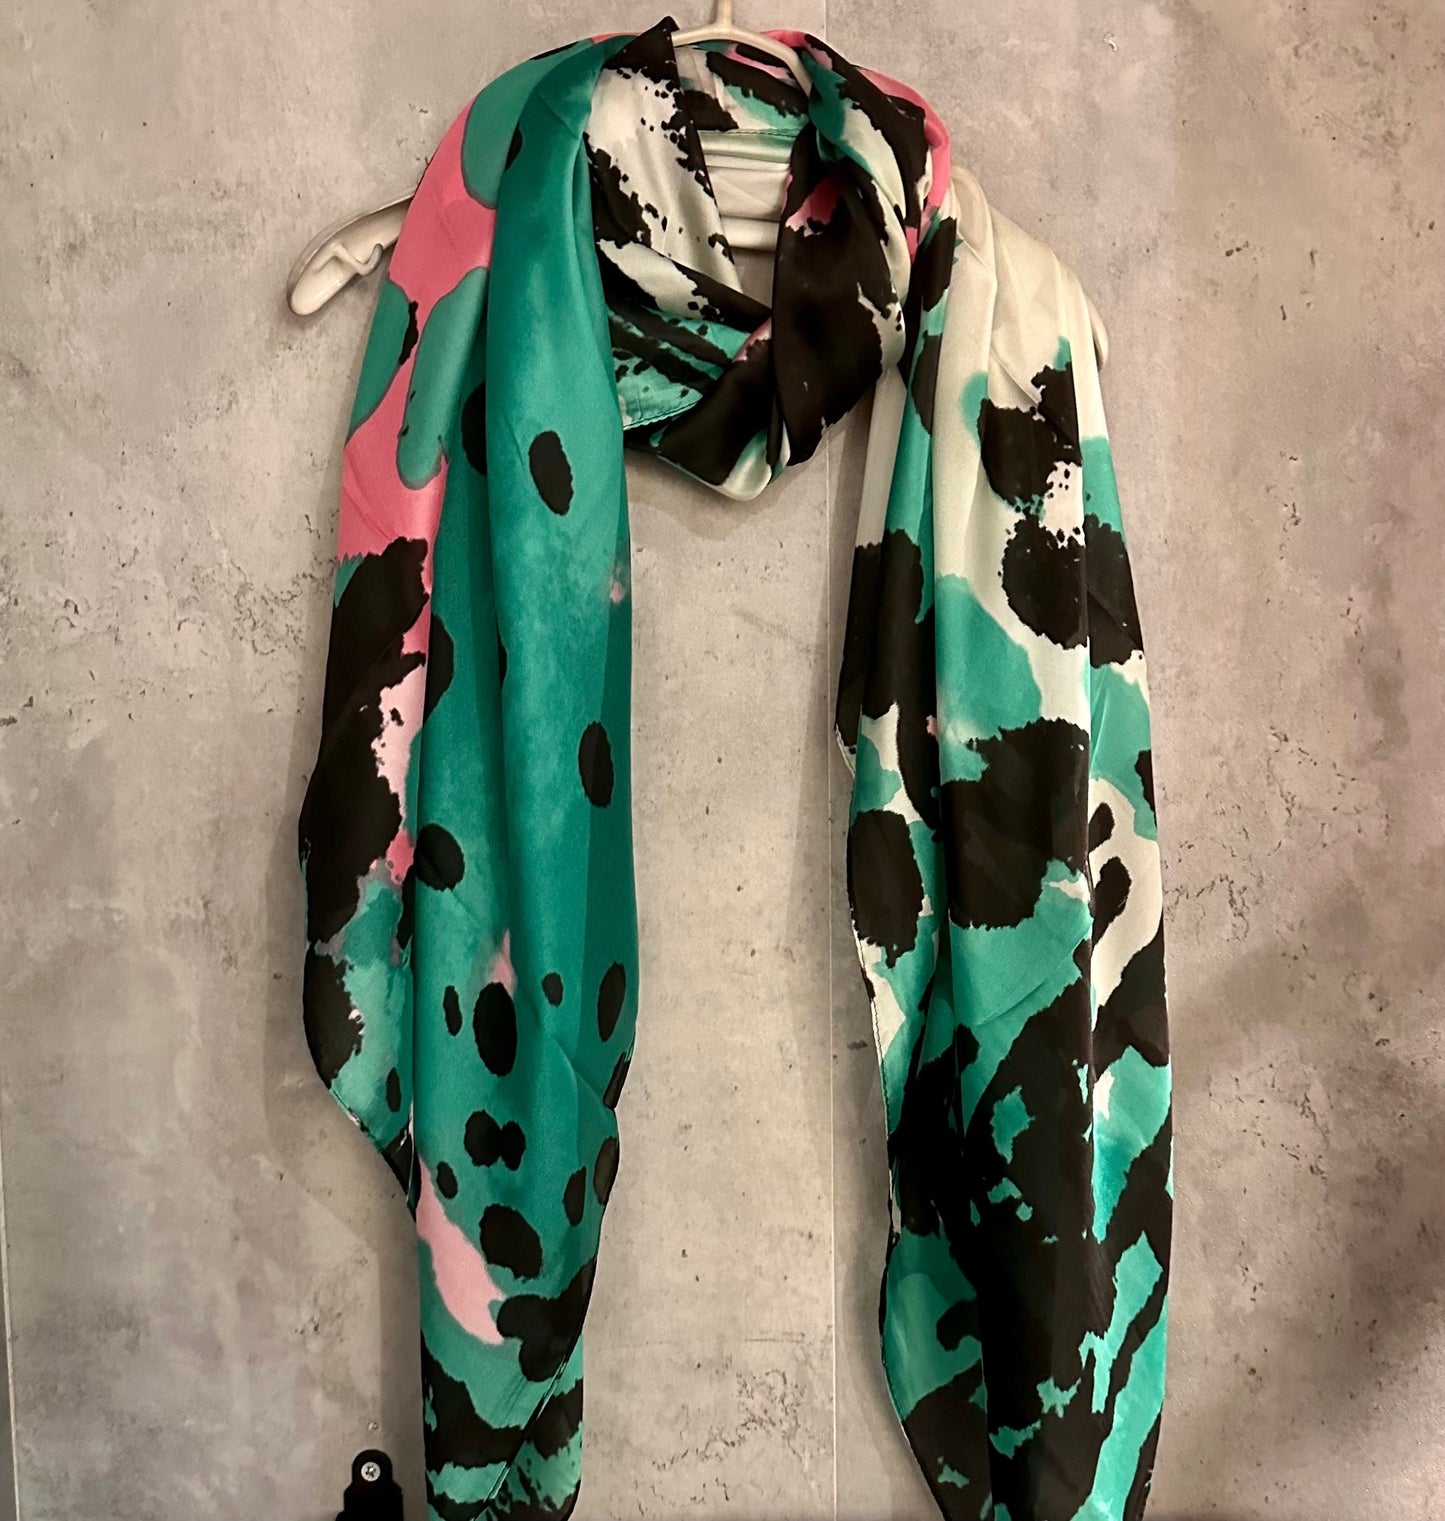 Splotches Color Green Pink Silk Scarf/Spring Summer Autumn Scarf/Scarf Women/Gifts For Mom/Gifts For Her Birthday Christmas/UK Seller